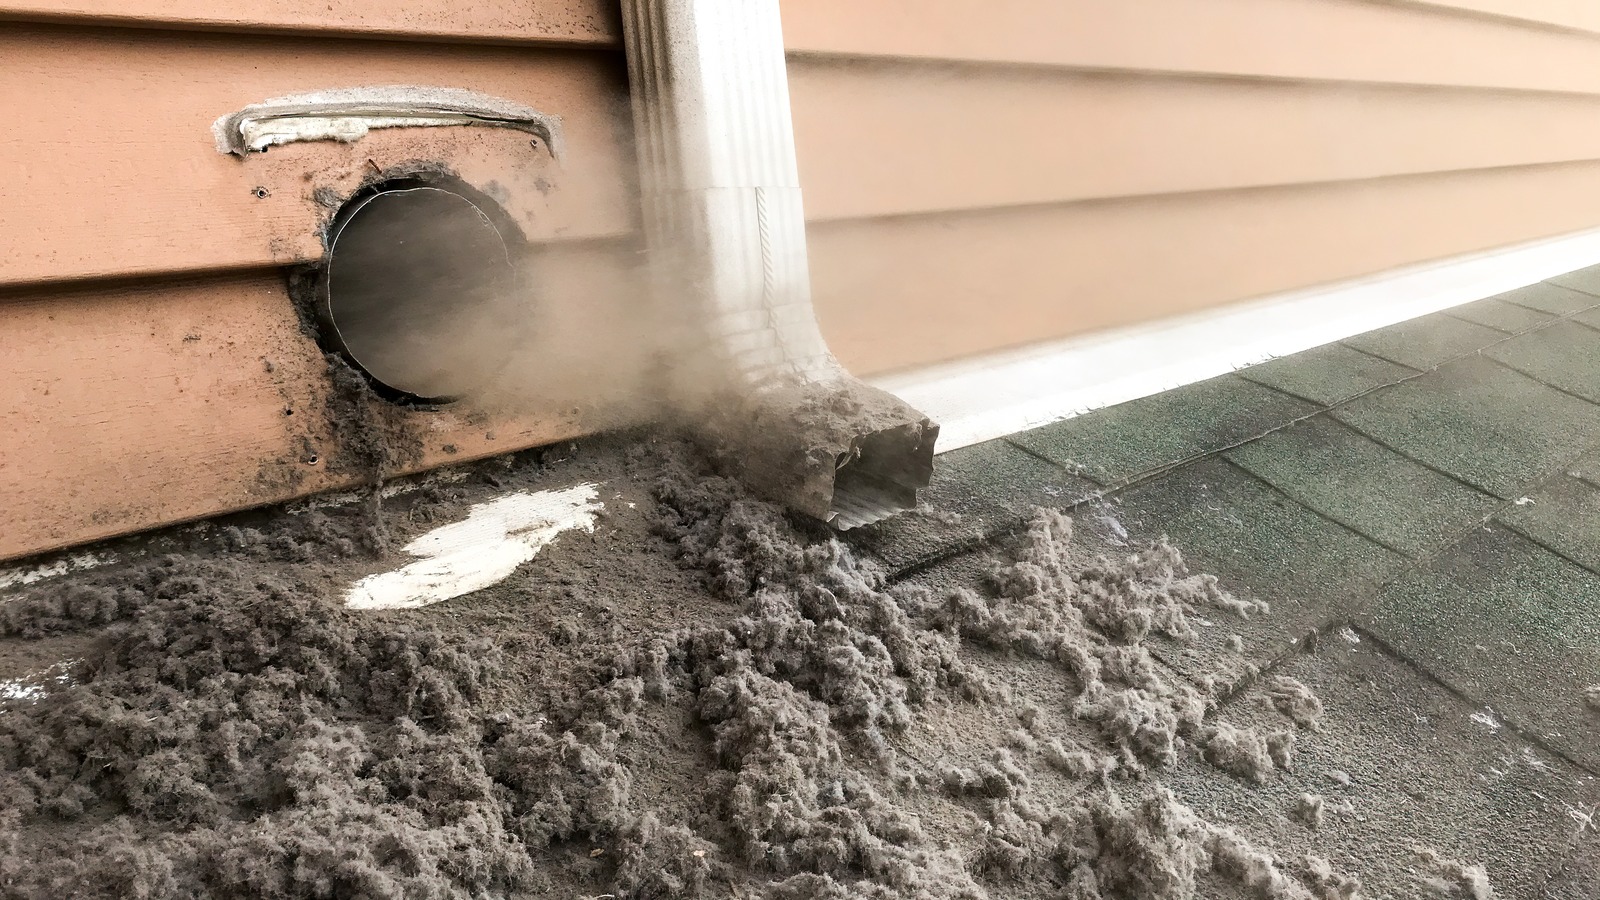 https://www.housedigest.com/img/gallery/we-can-safely-clean-out-our-dryer-vent-without-getting-on-the-roof-thanks-to-this-tiktok/l-intro-1699556156.jpg